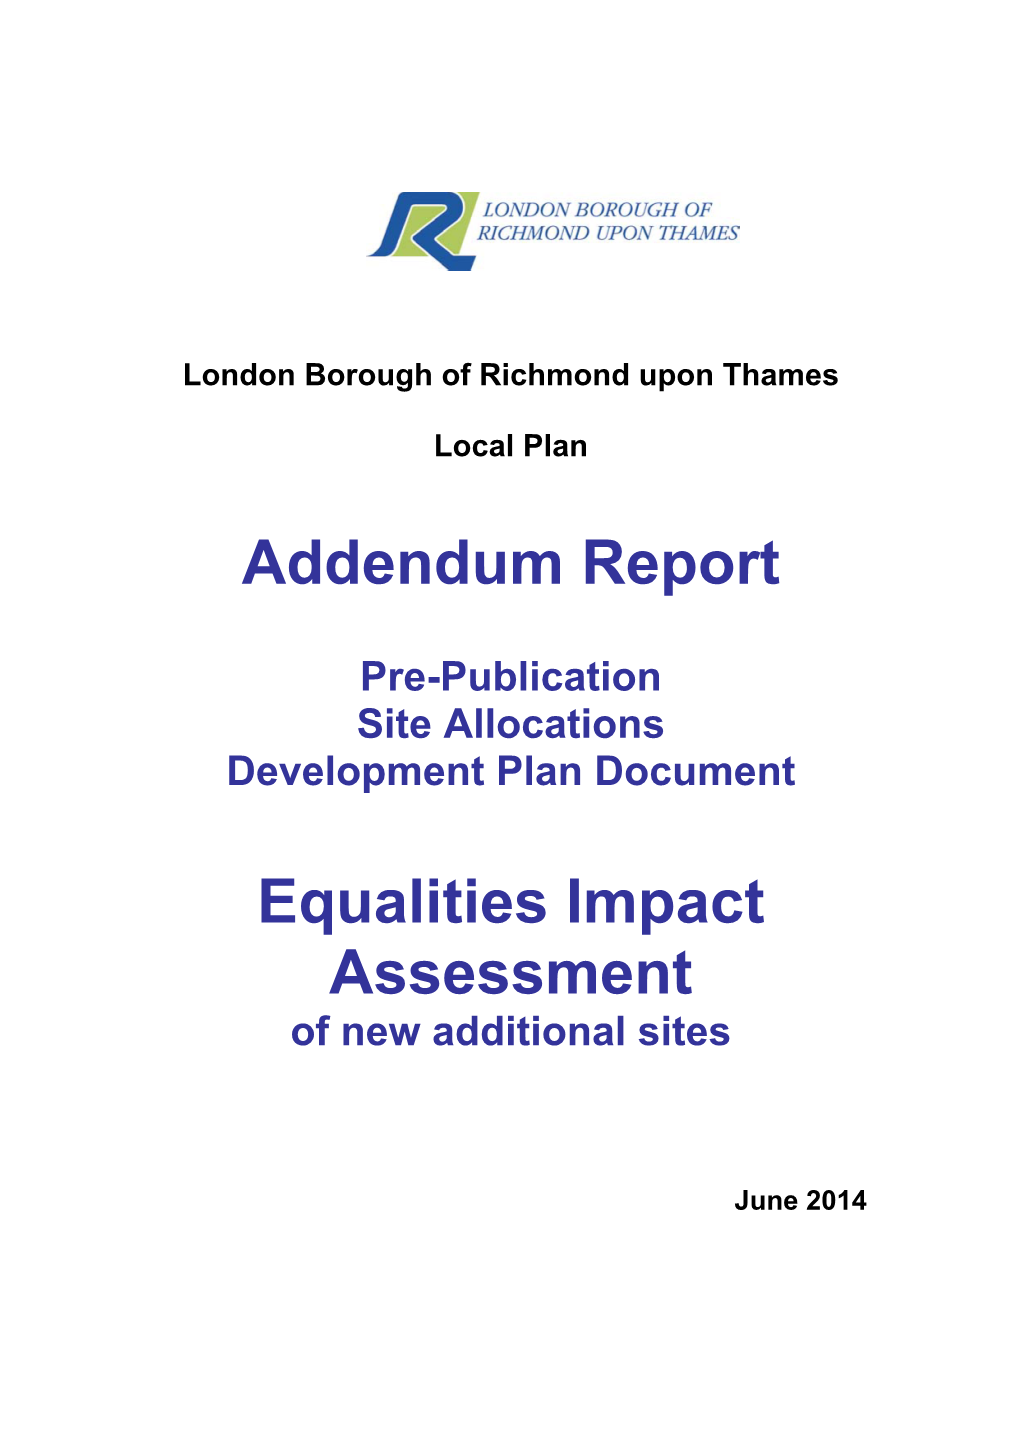 Equalities Impact Assessment of the New Additional Sites